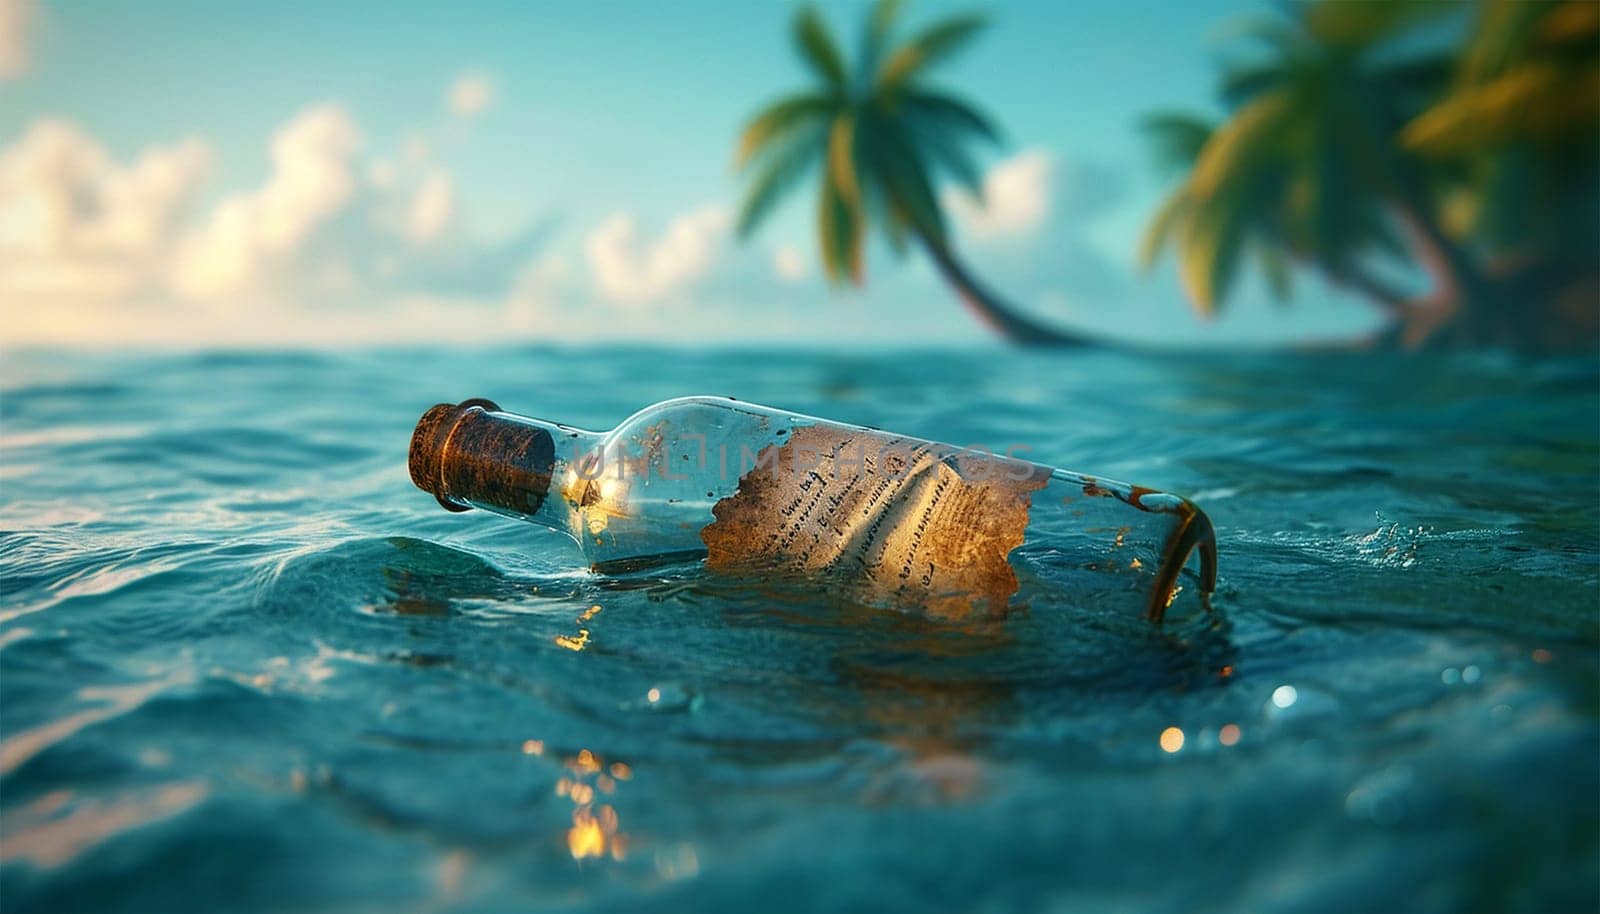 Glass bottle with paper message on the seashore of tropical island. Shipwreck in the sea. Crying for help. Save Our Souls (SOS) by Annebel146